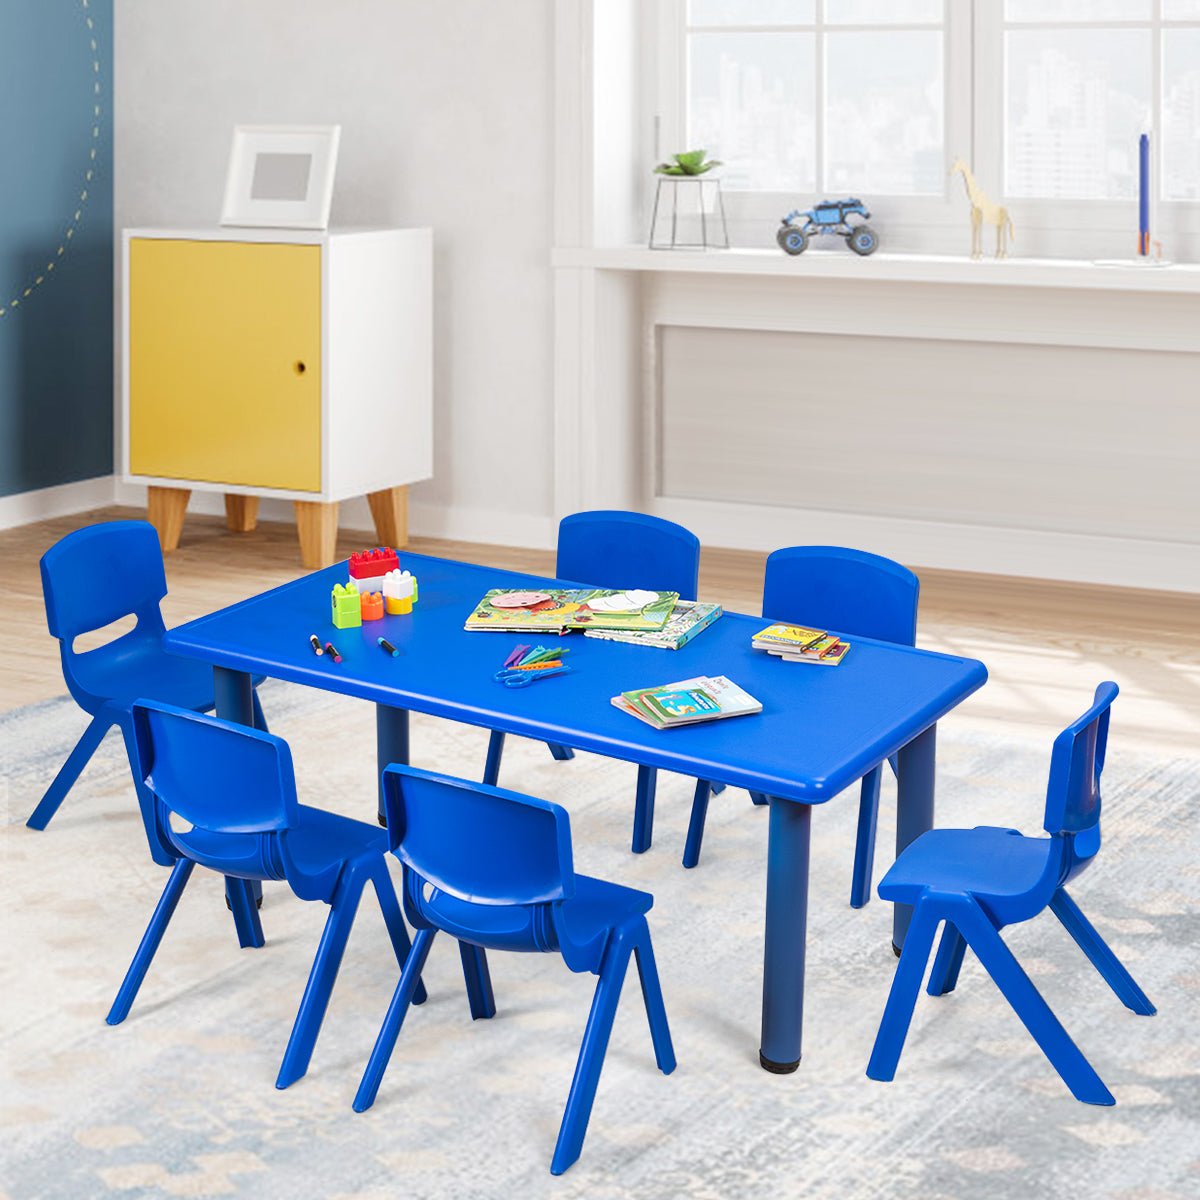 Kids Table and 6 Chairs Set - Comfortable Seating for Preschools and Residences